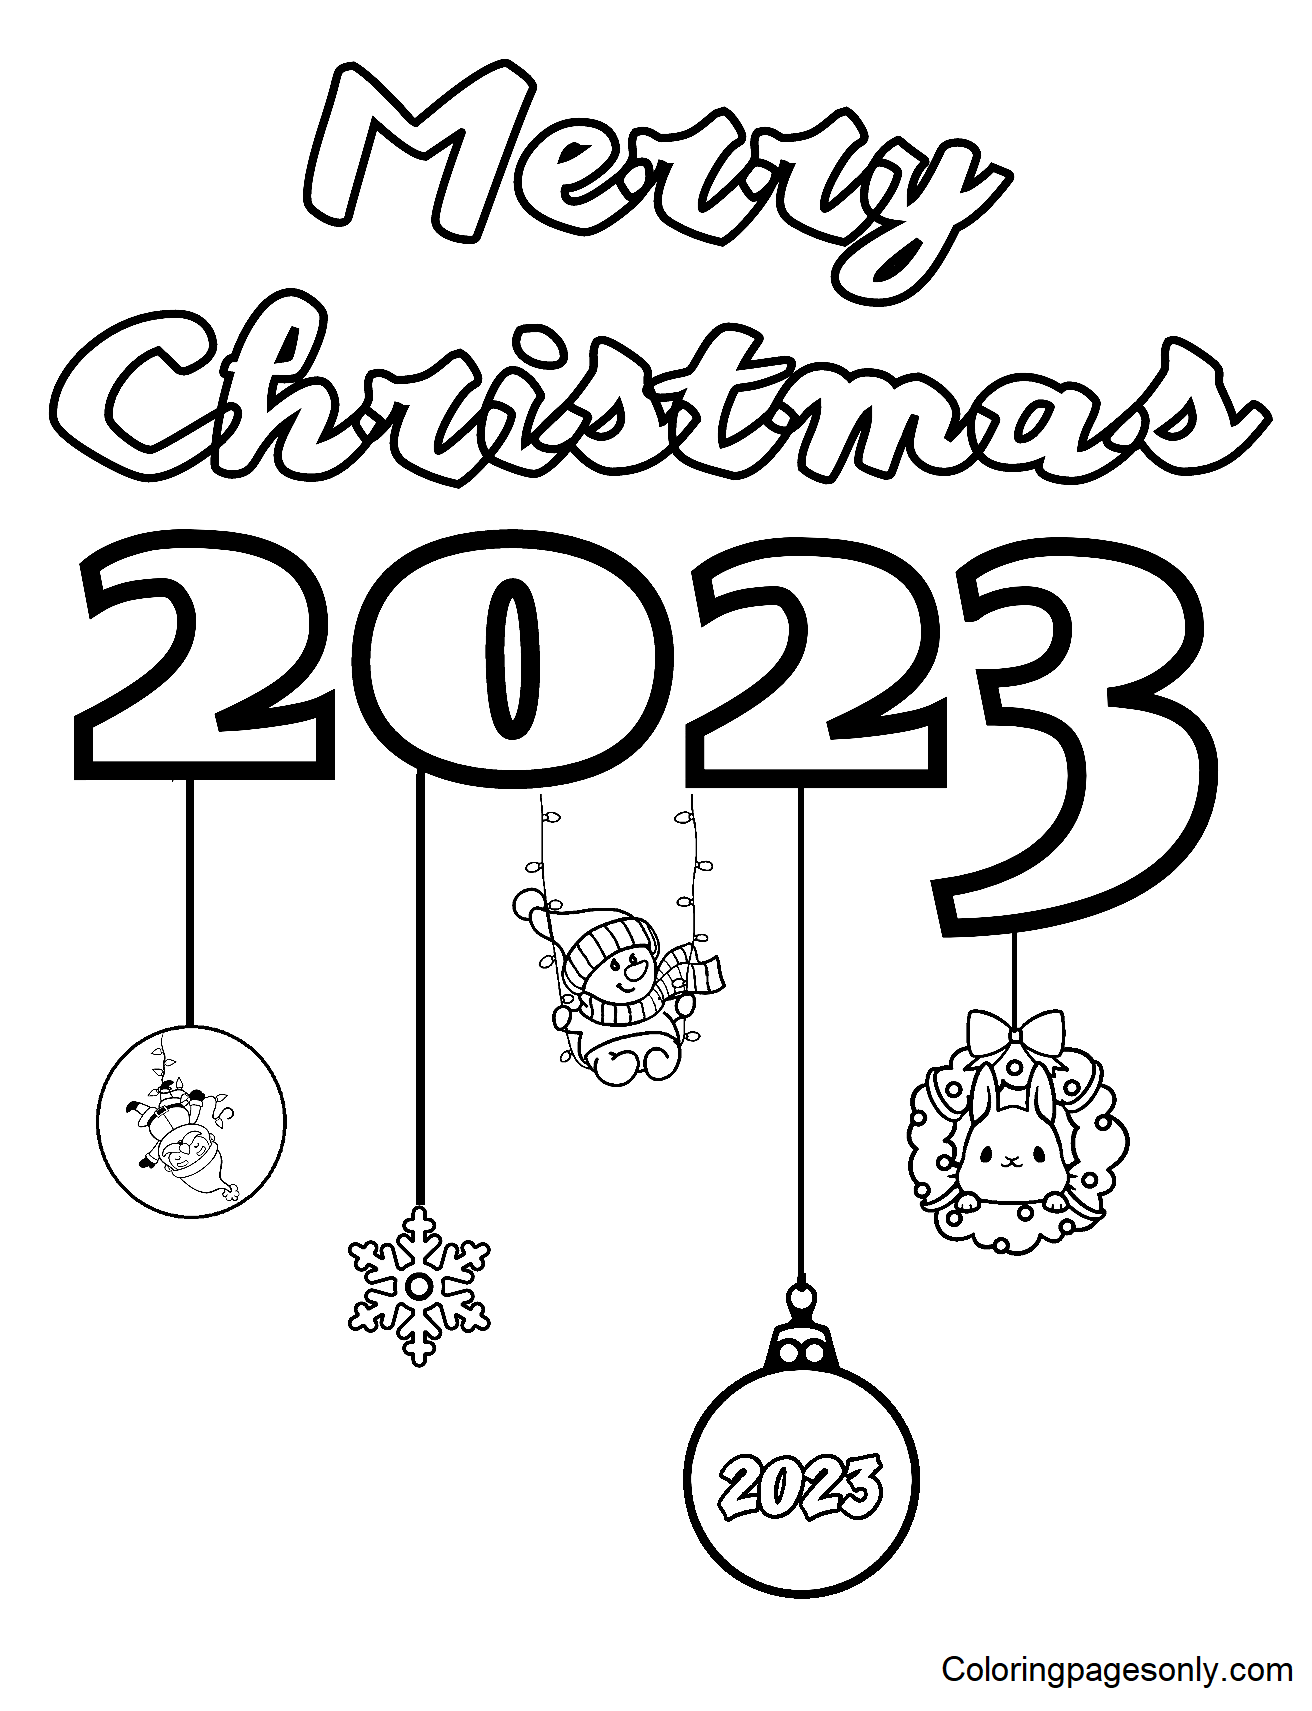 Merry Christmas 2023 coloring Sheets Coloring Pages